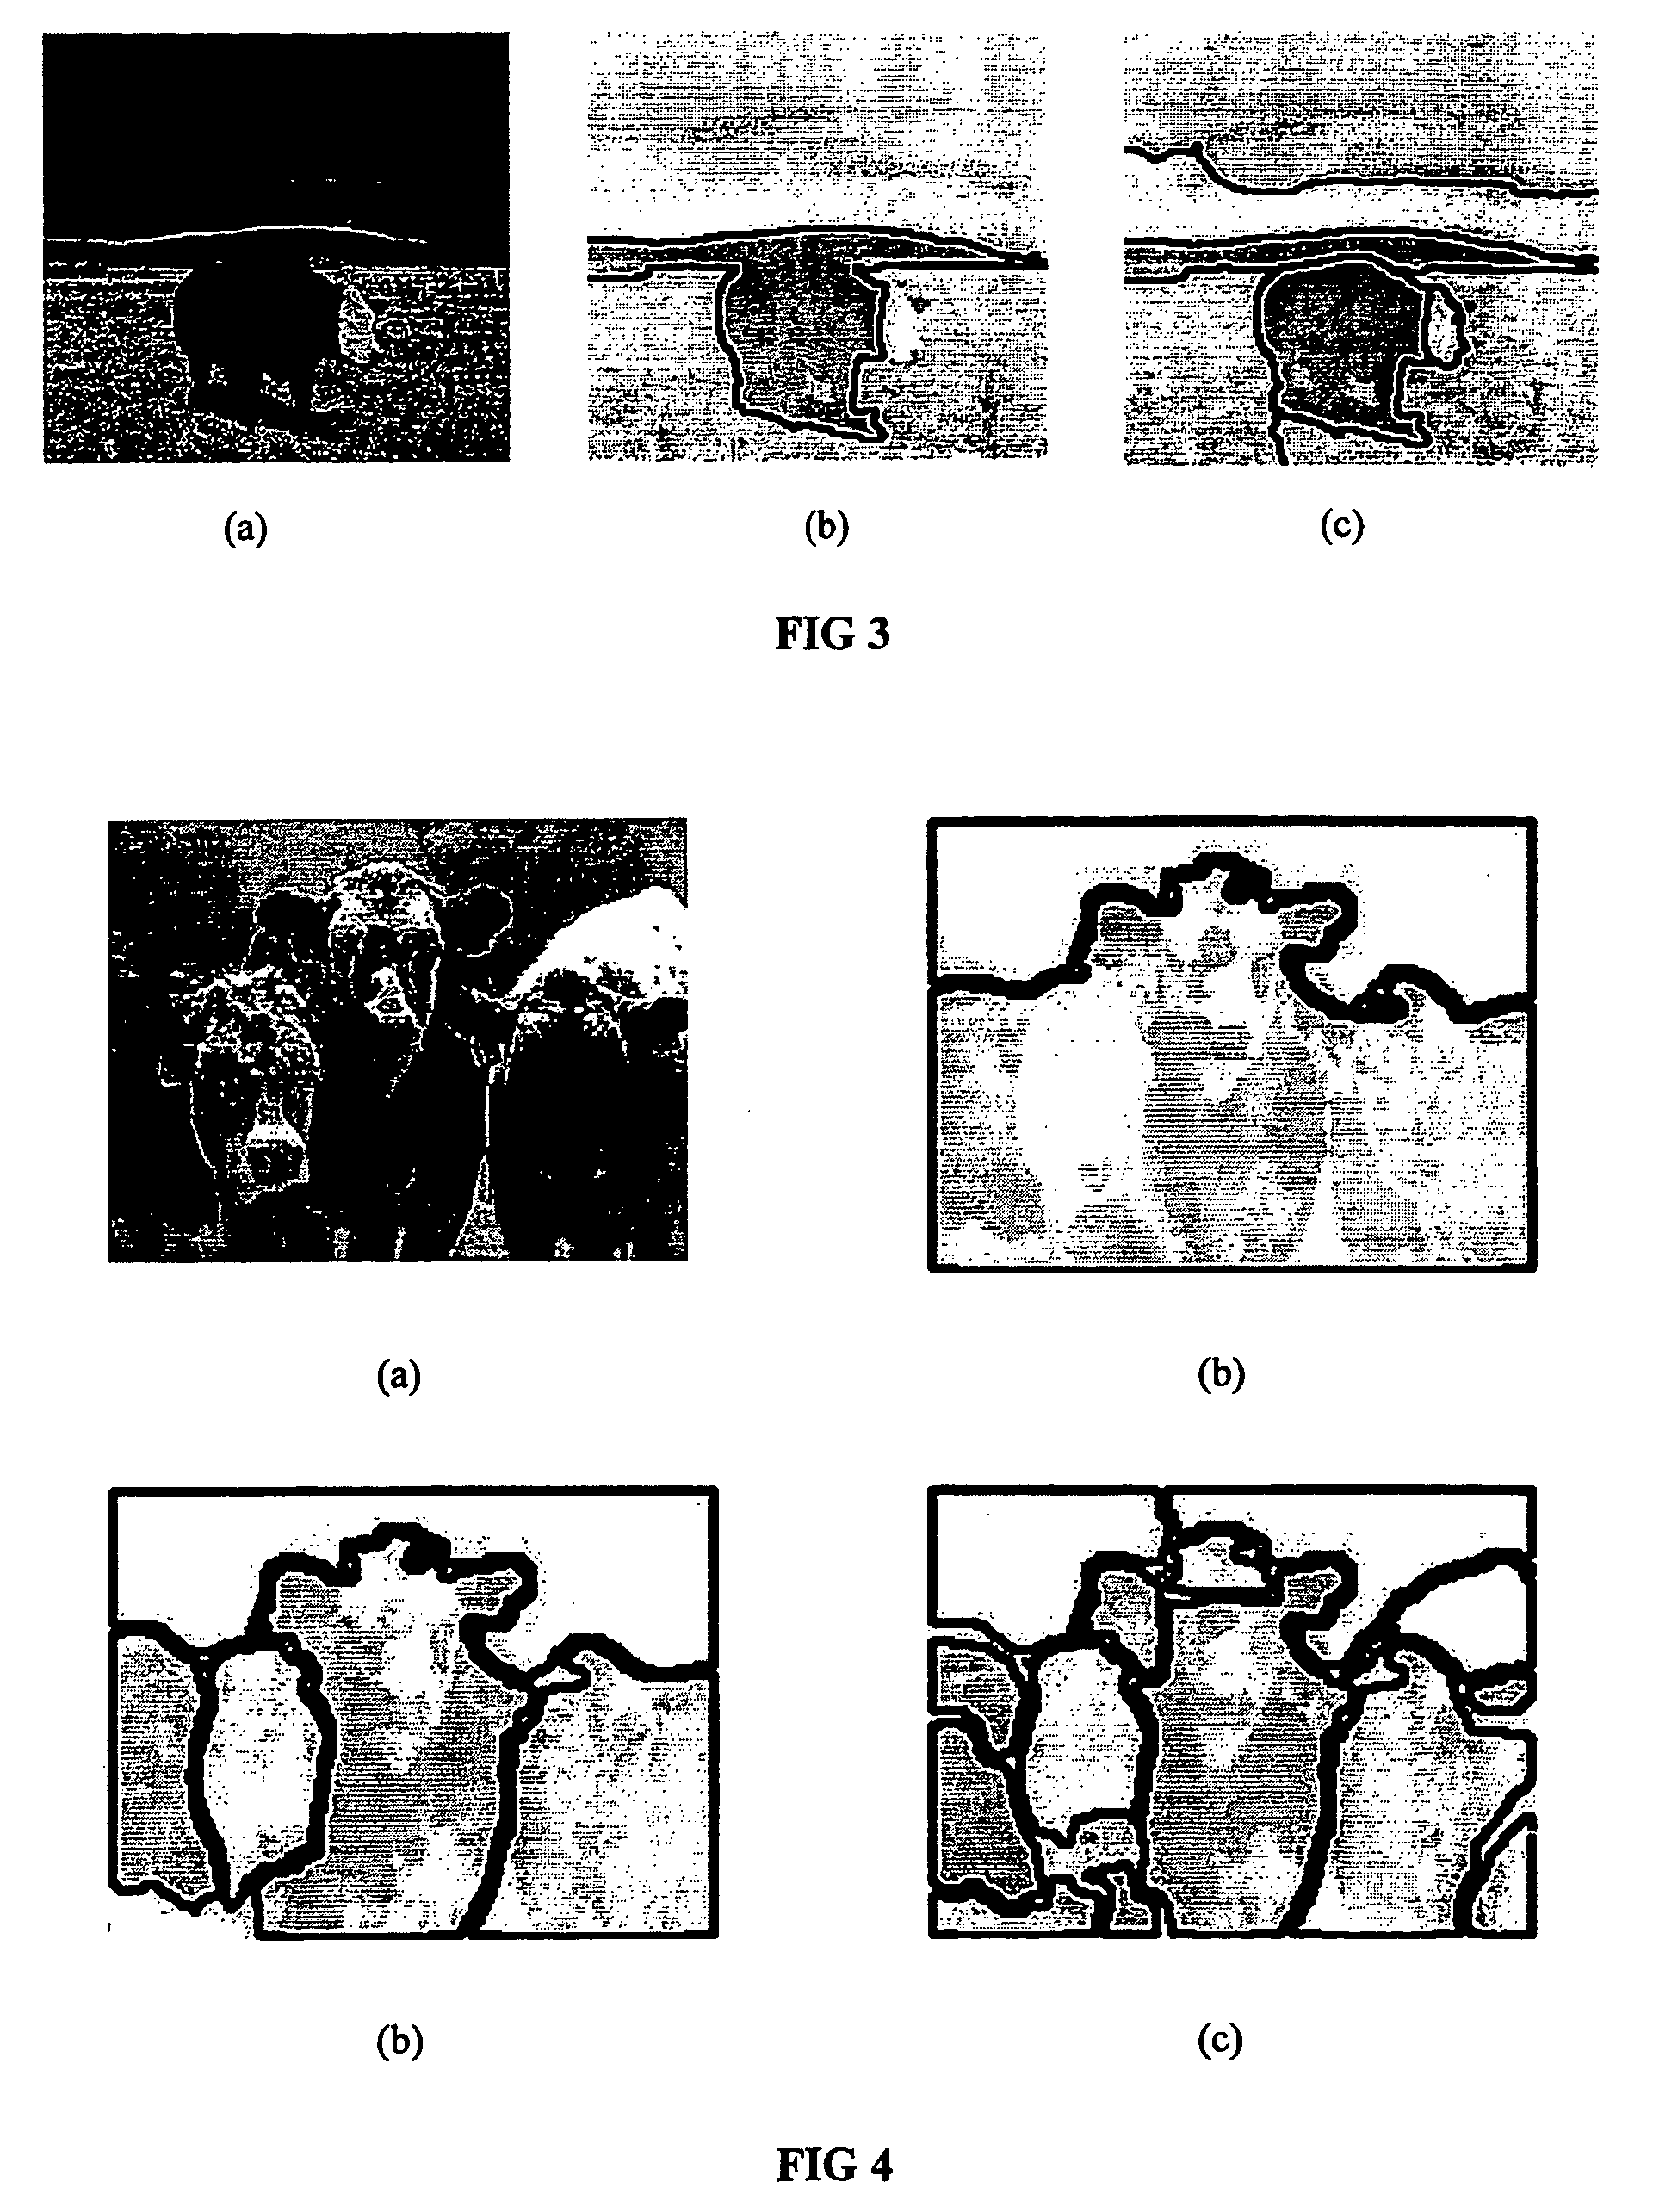 Method and apparatus for data clustering including segmentation and boundary detection